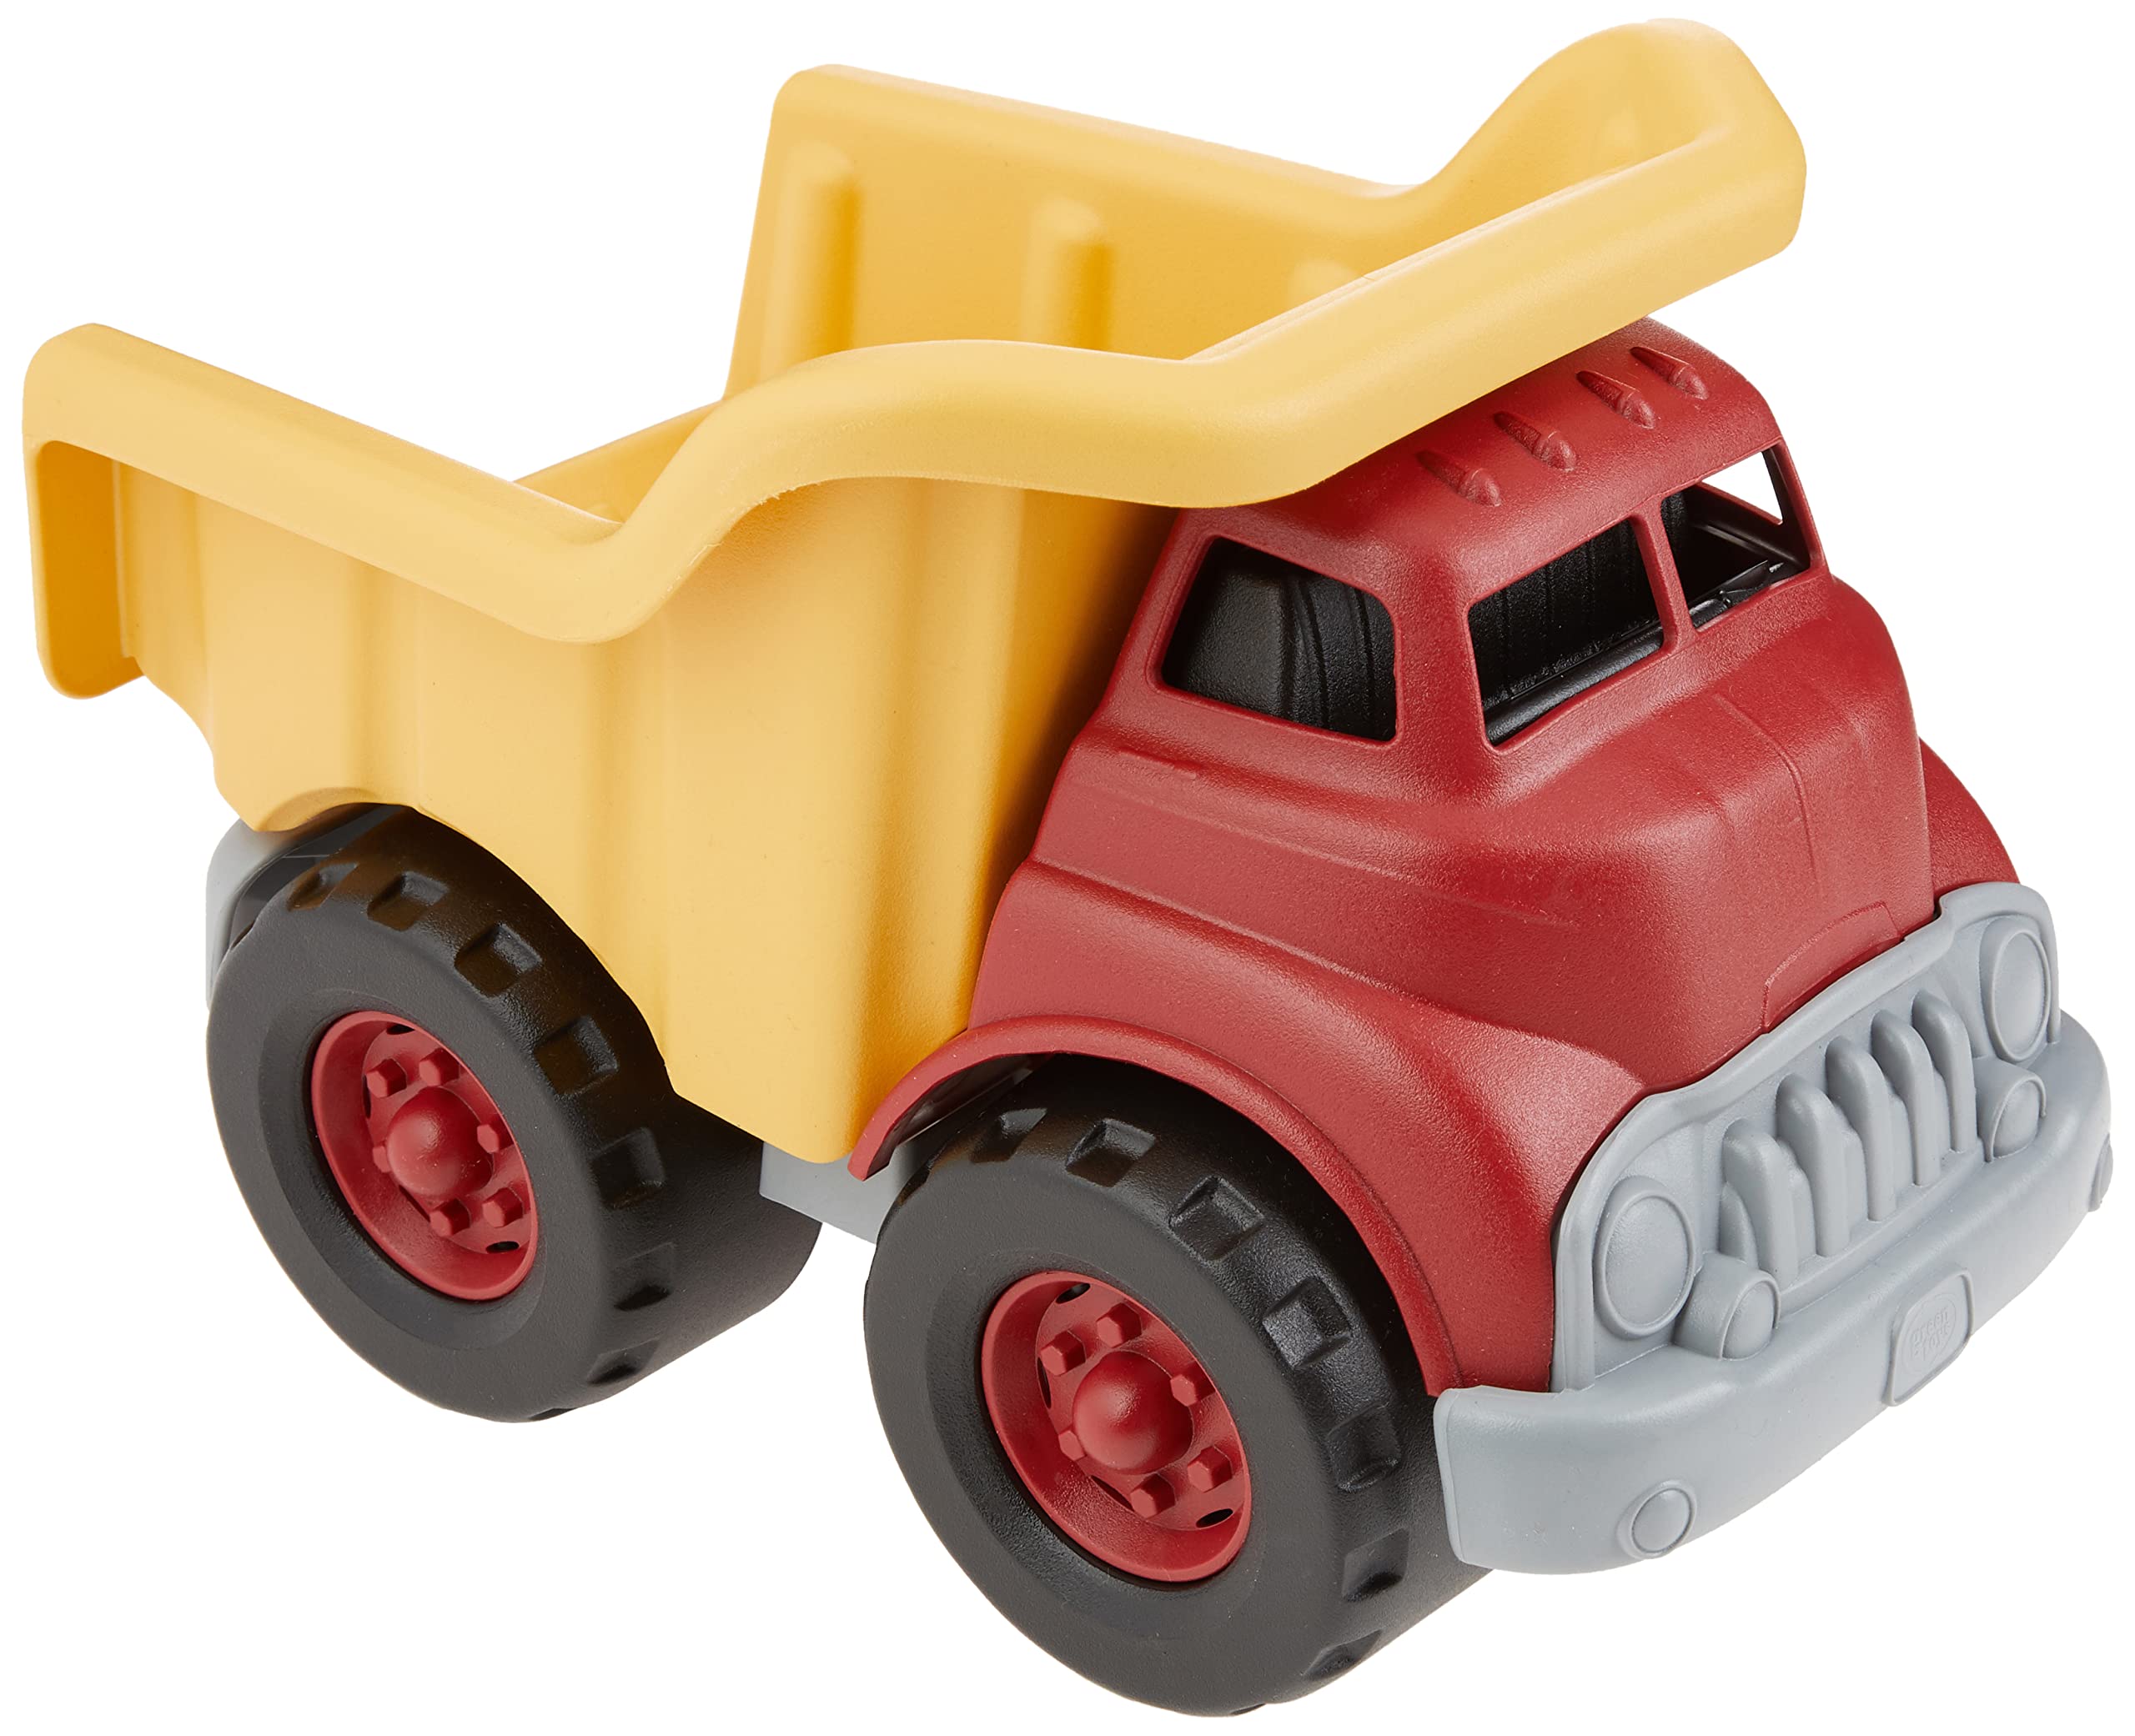 Green Toys Dump Truck $10.90 + Free Shipping w/ Prime or on orders $35+